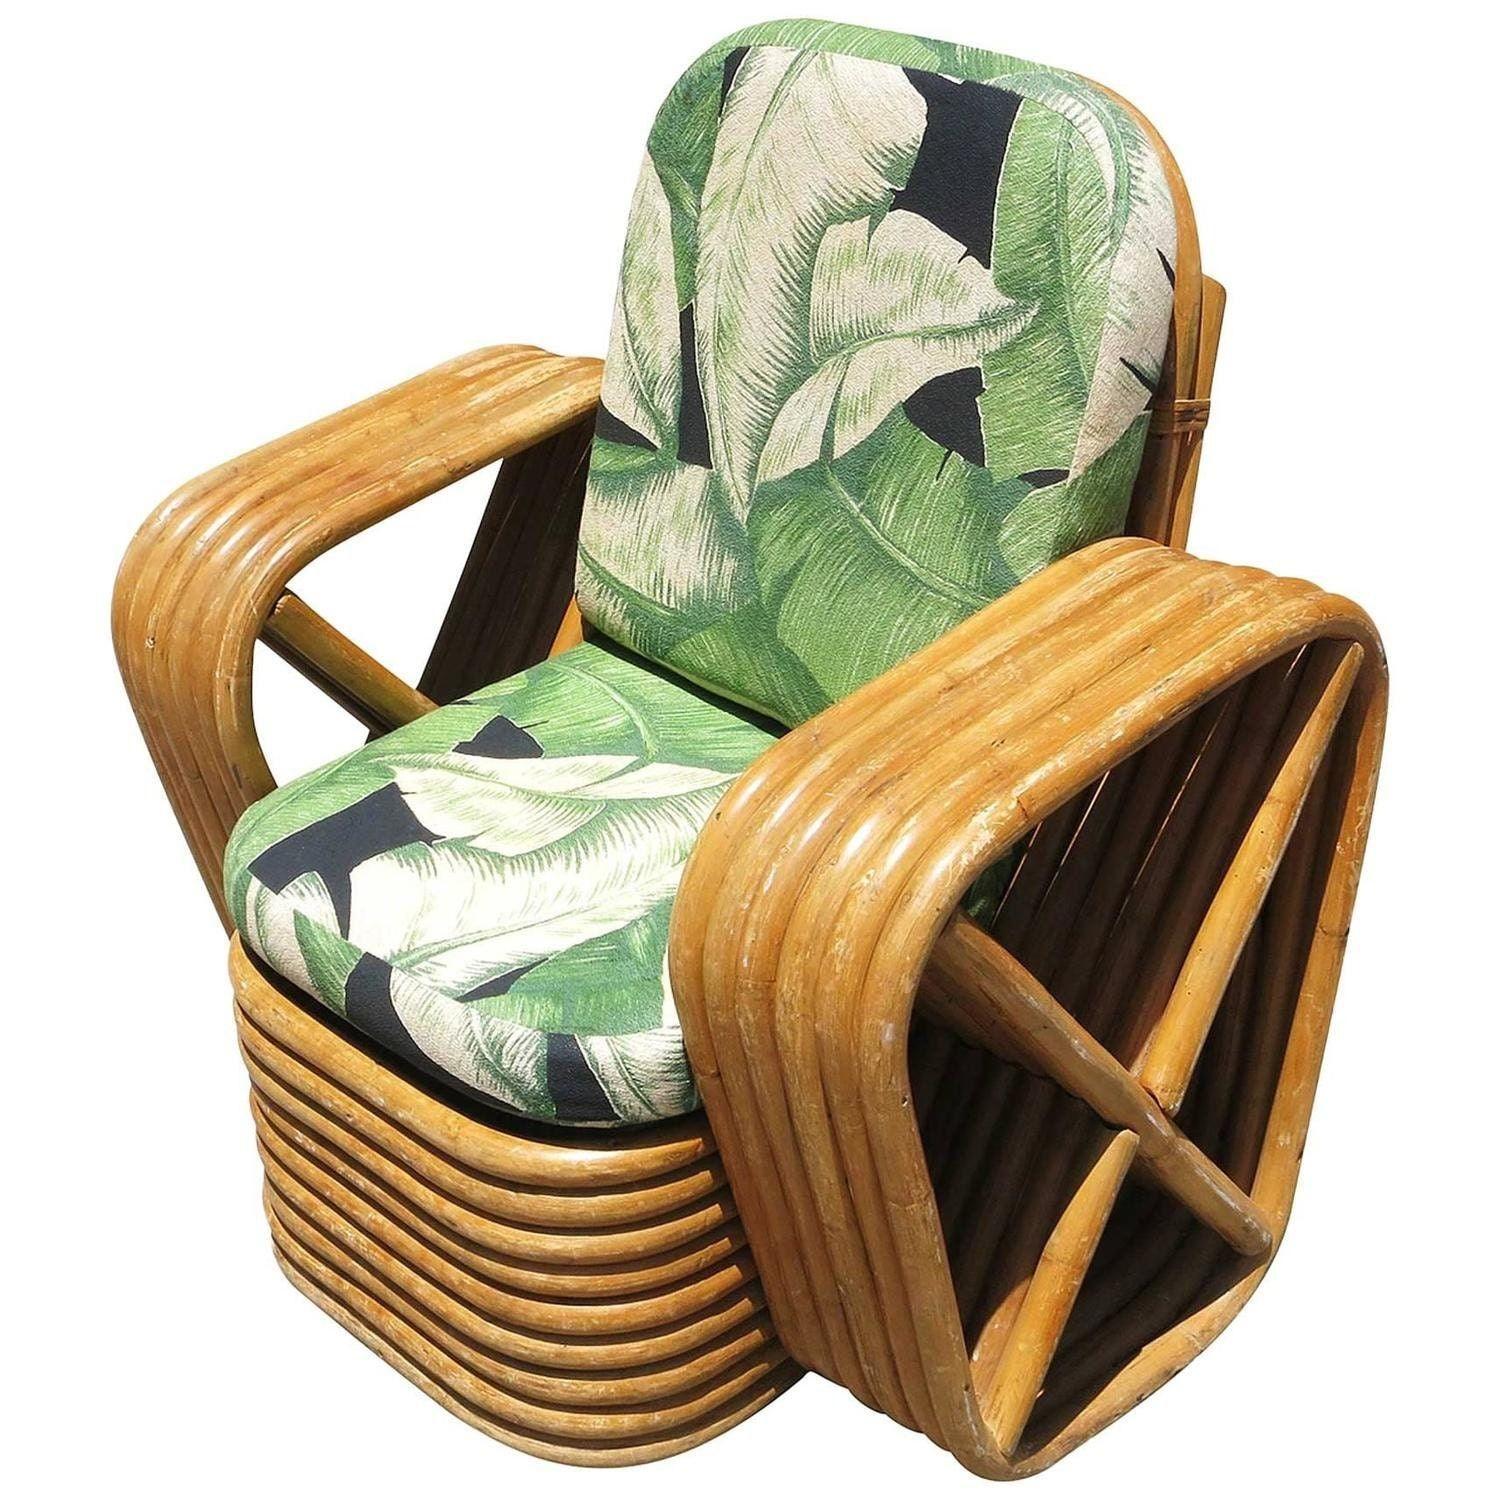 Child size Paul Frankl lounge chair, this chair features six-strand square pretzel arms with a Classic stacked base.


Custom cushions C.O.M. (Costumers Own Material) are included in the price. Simply supply the fabric and we have the cushions